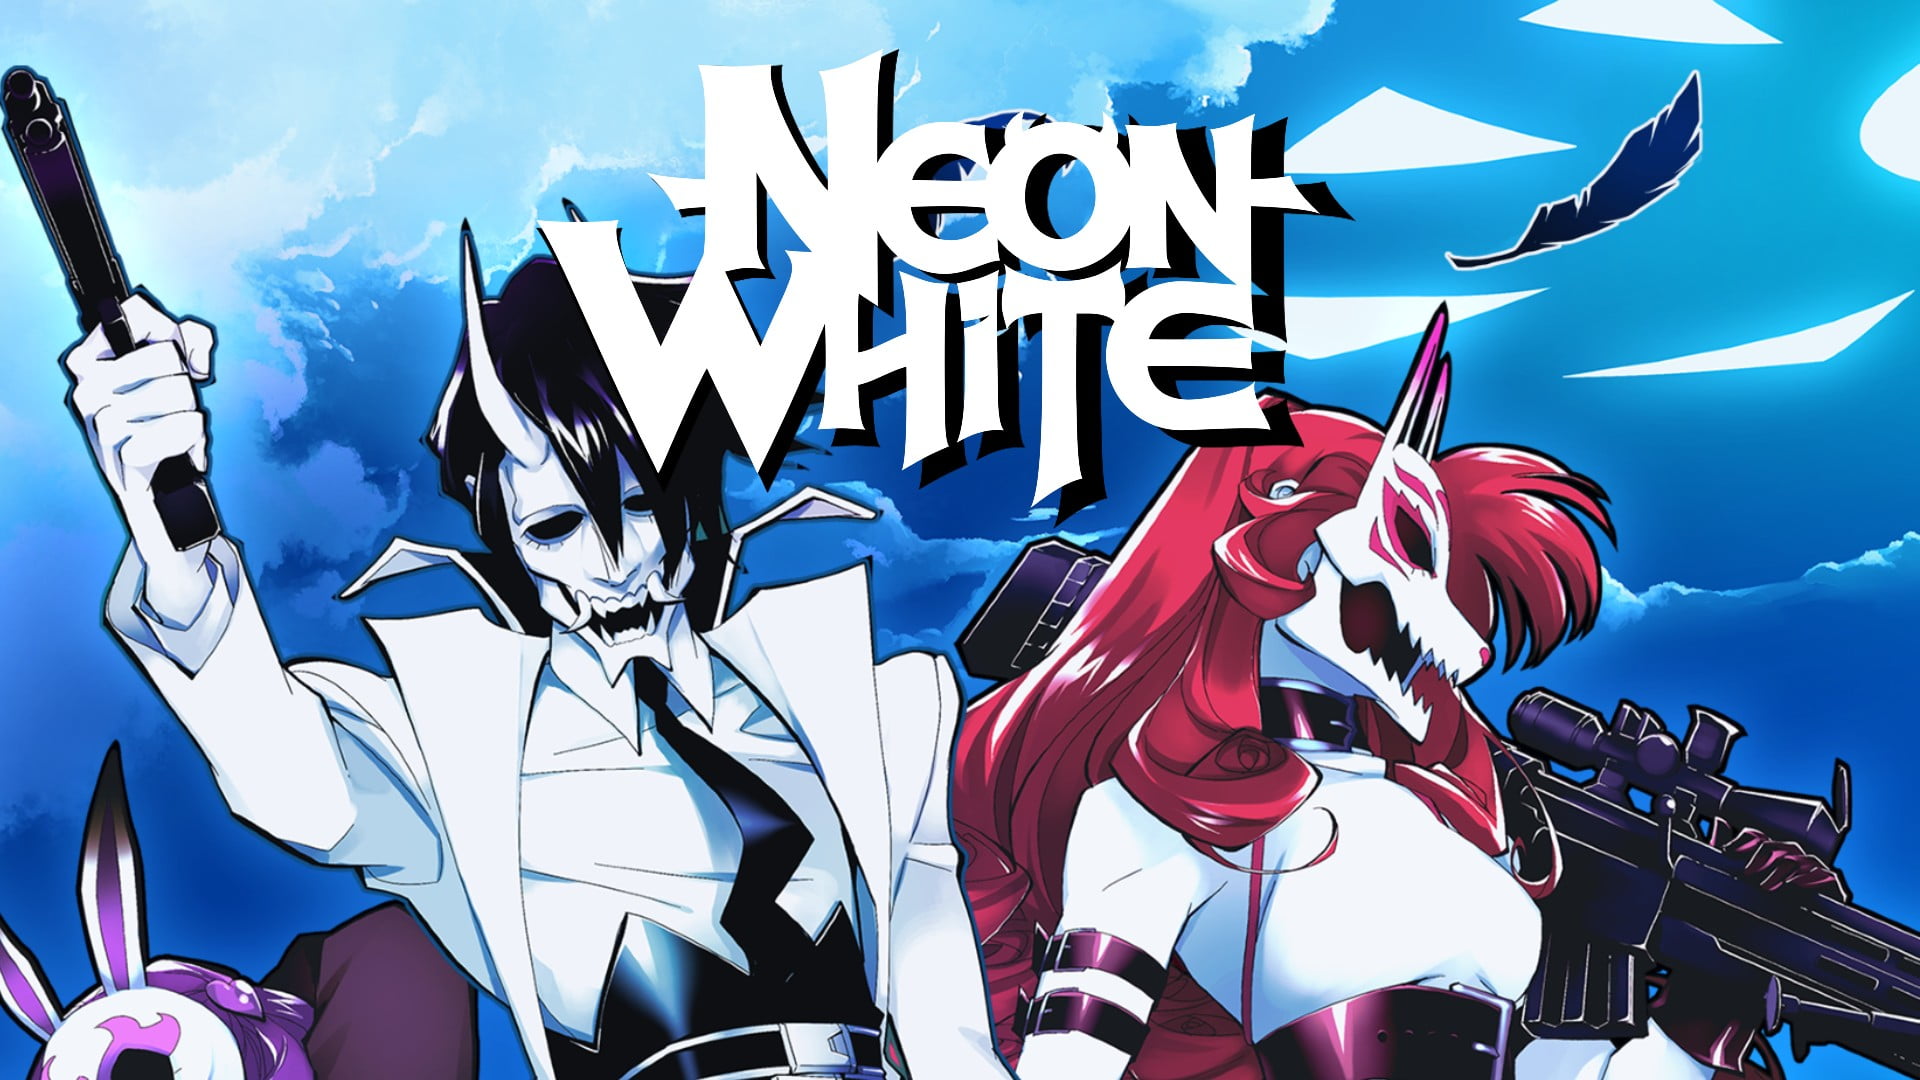 REVIEW: NEON WHITE is a perfect blend of speed, style, and substance.